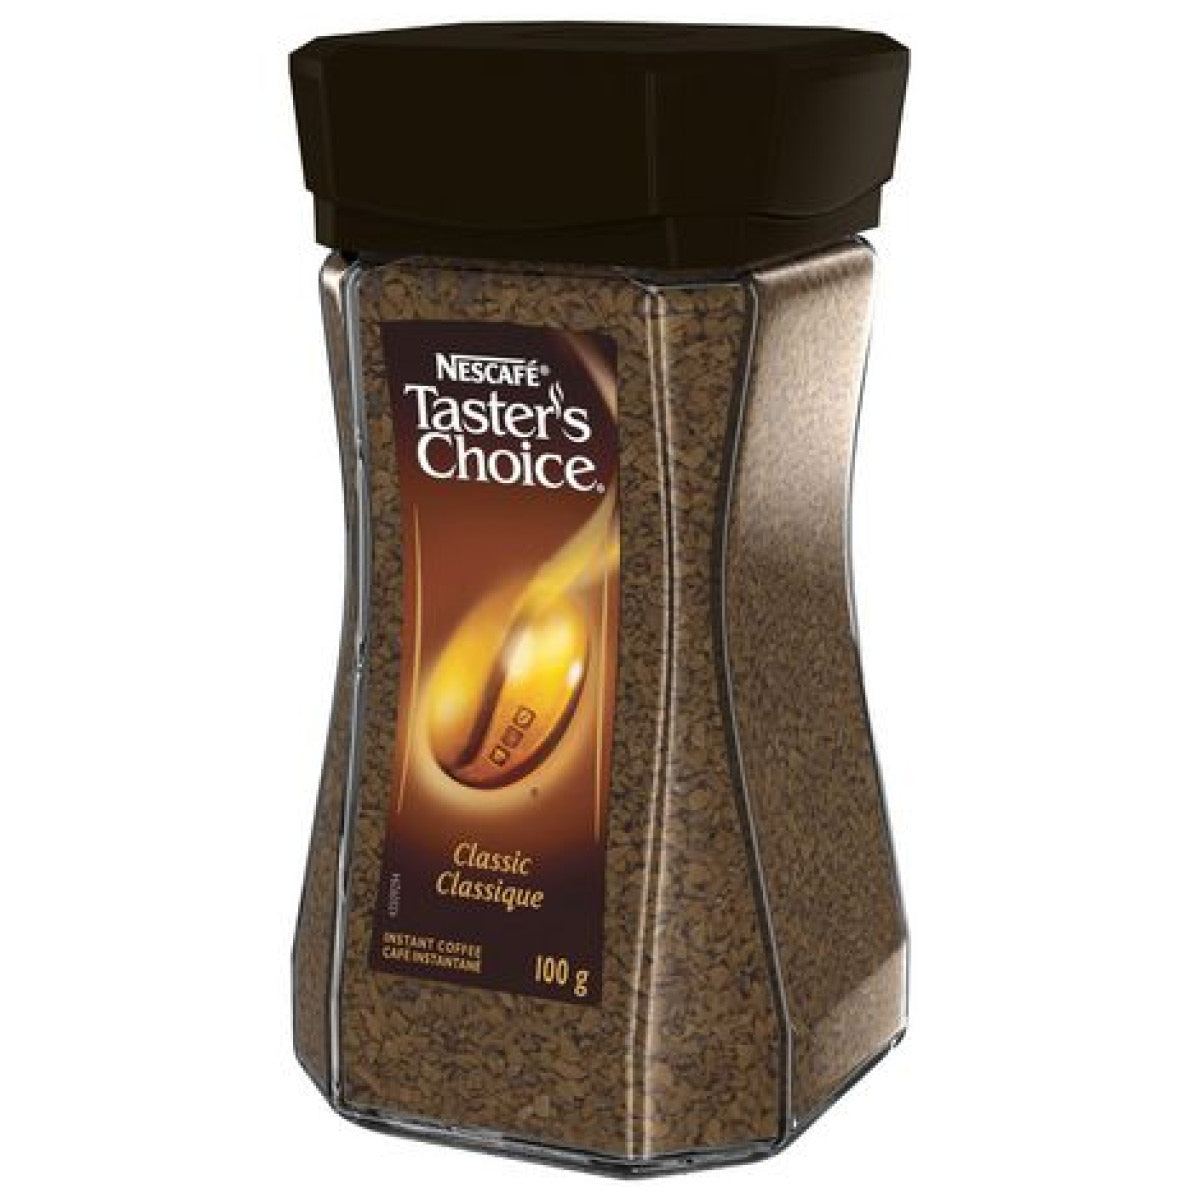 Nescafe Tasters Choice Classic Instant Coffee, 100g